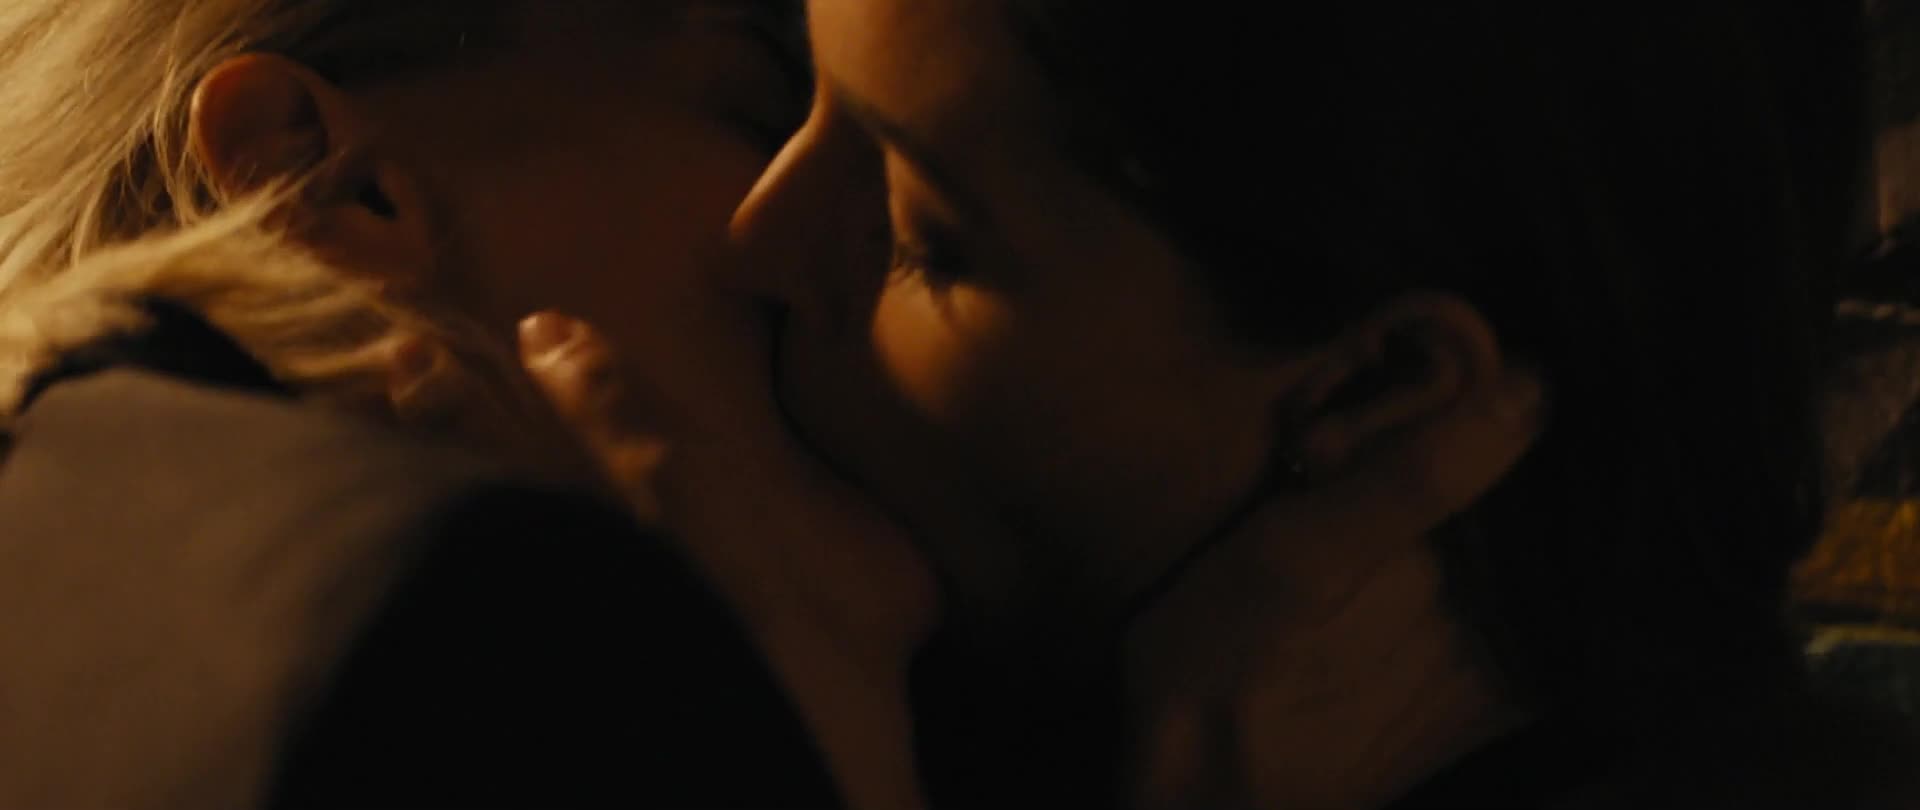 Erika Linder scene from below her mouth